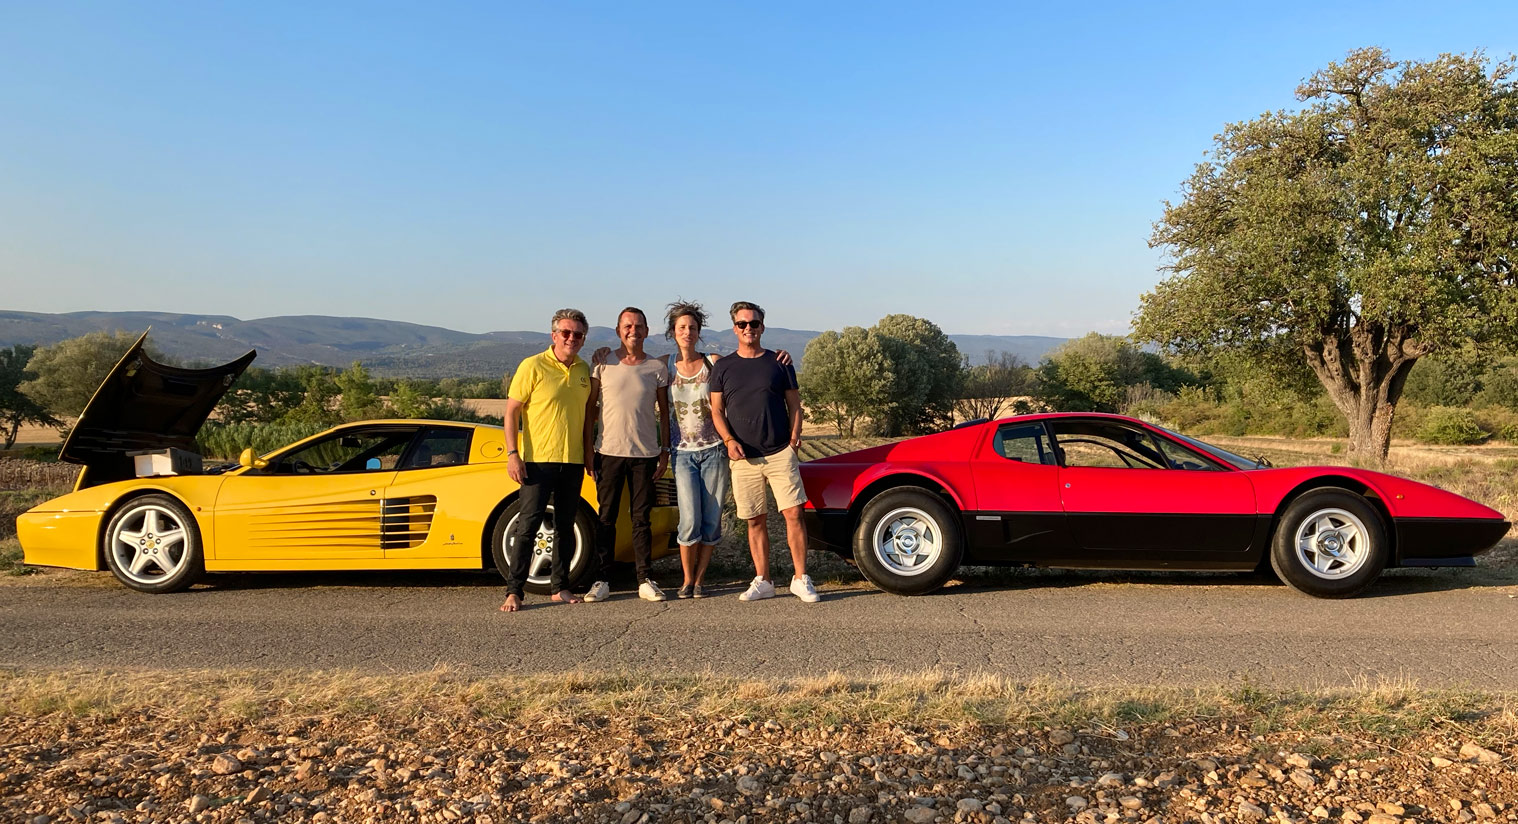 Photo of 4 people posing for the camera on a roadside between yellow and red Ferrari cars